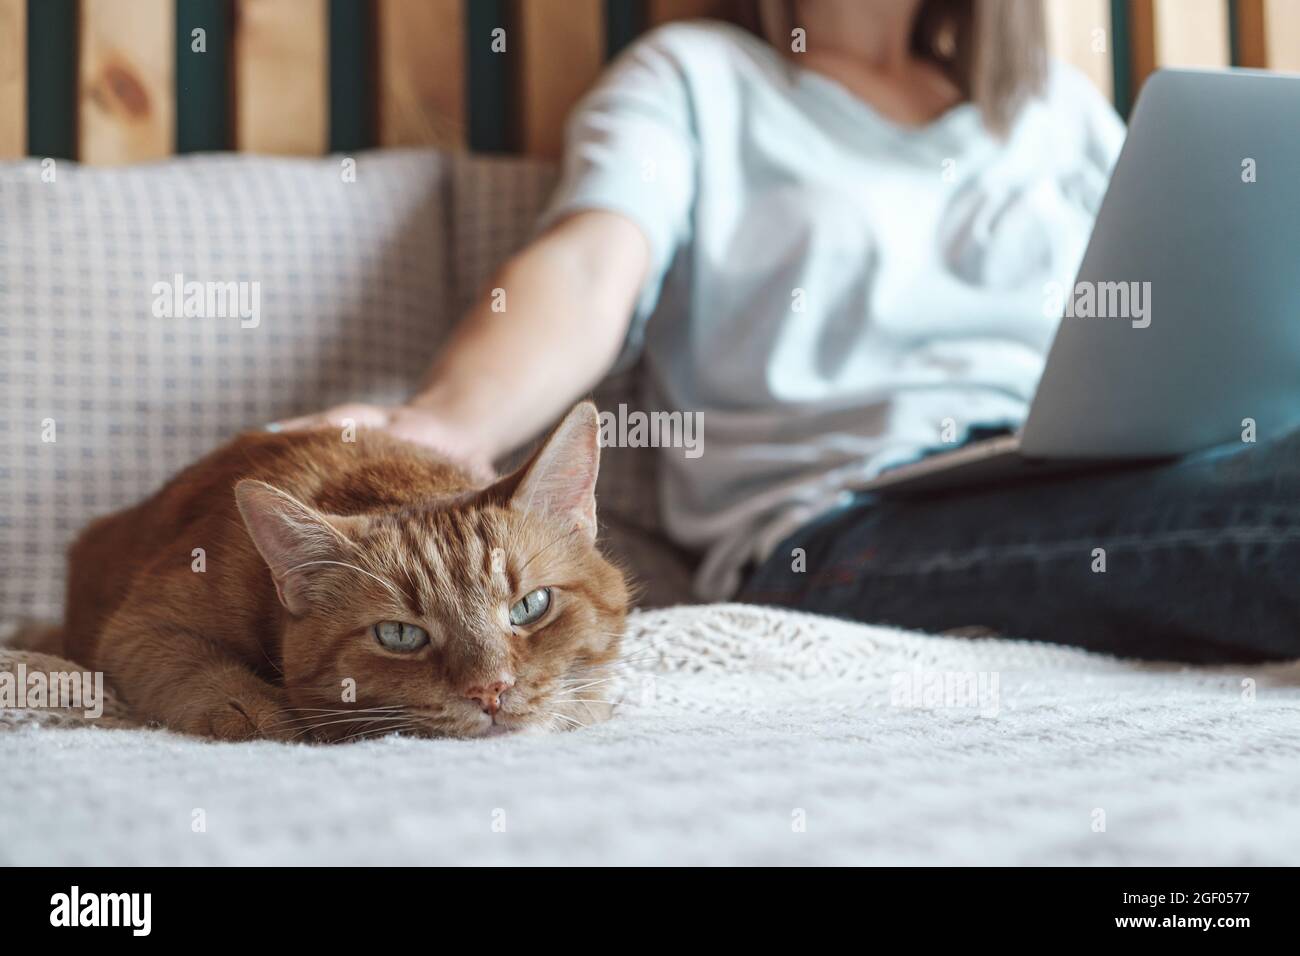 Flexible hours and remote work, Domestic cat lies on the bed, woman using laptop to work, lying in the bedroom, at home Stock Photo